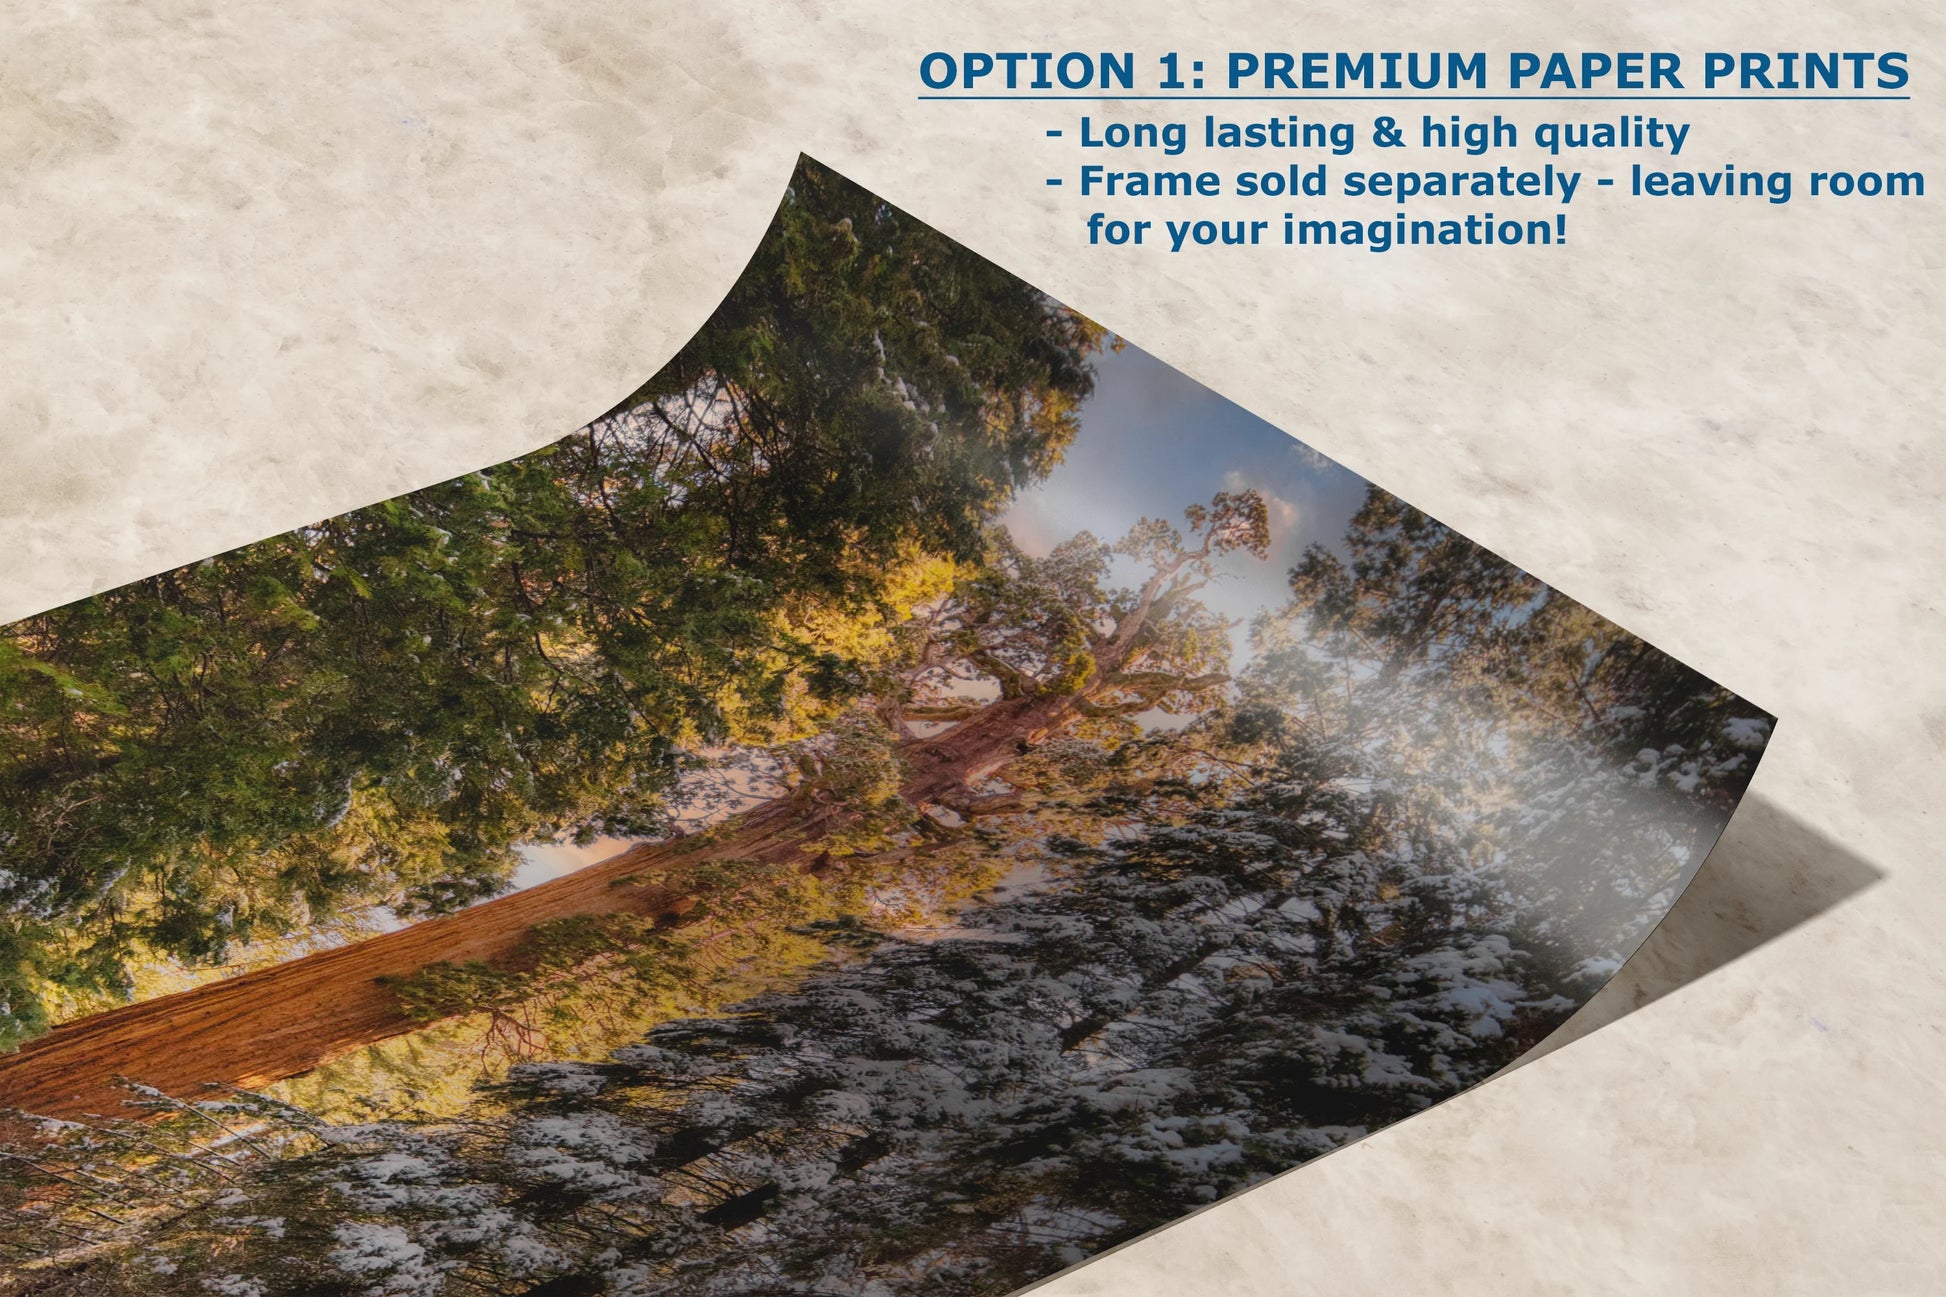 A premium paper print of Grant Grove's Giant Sequoia lies ready for custom framing, offering a versatile and classic touch of nature for any décor.